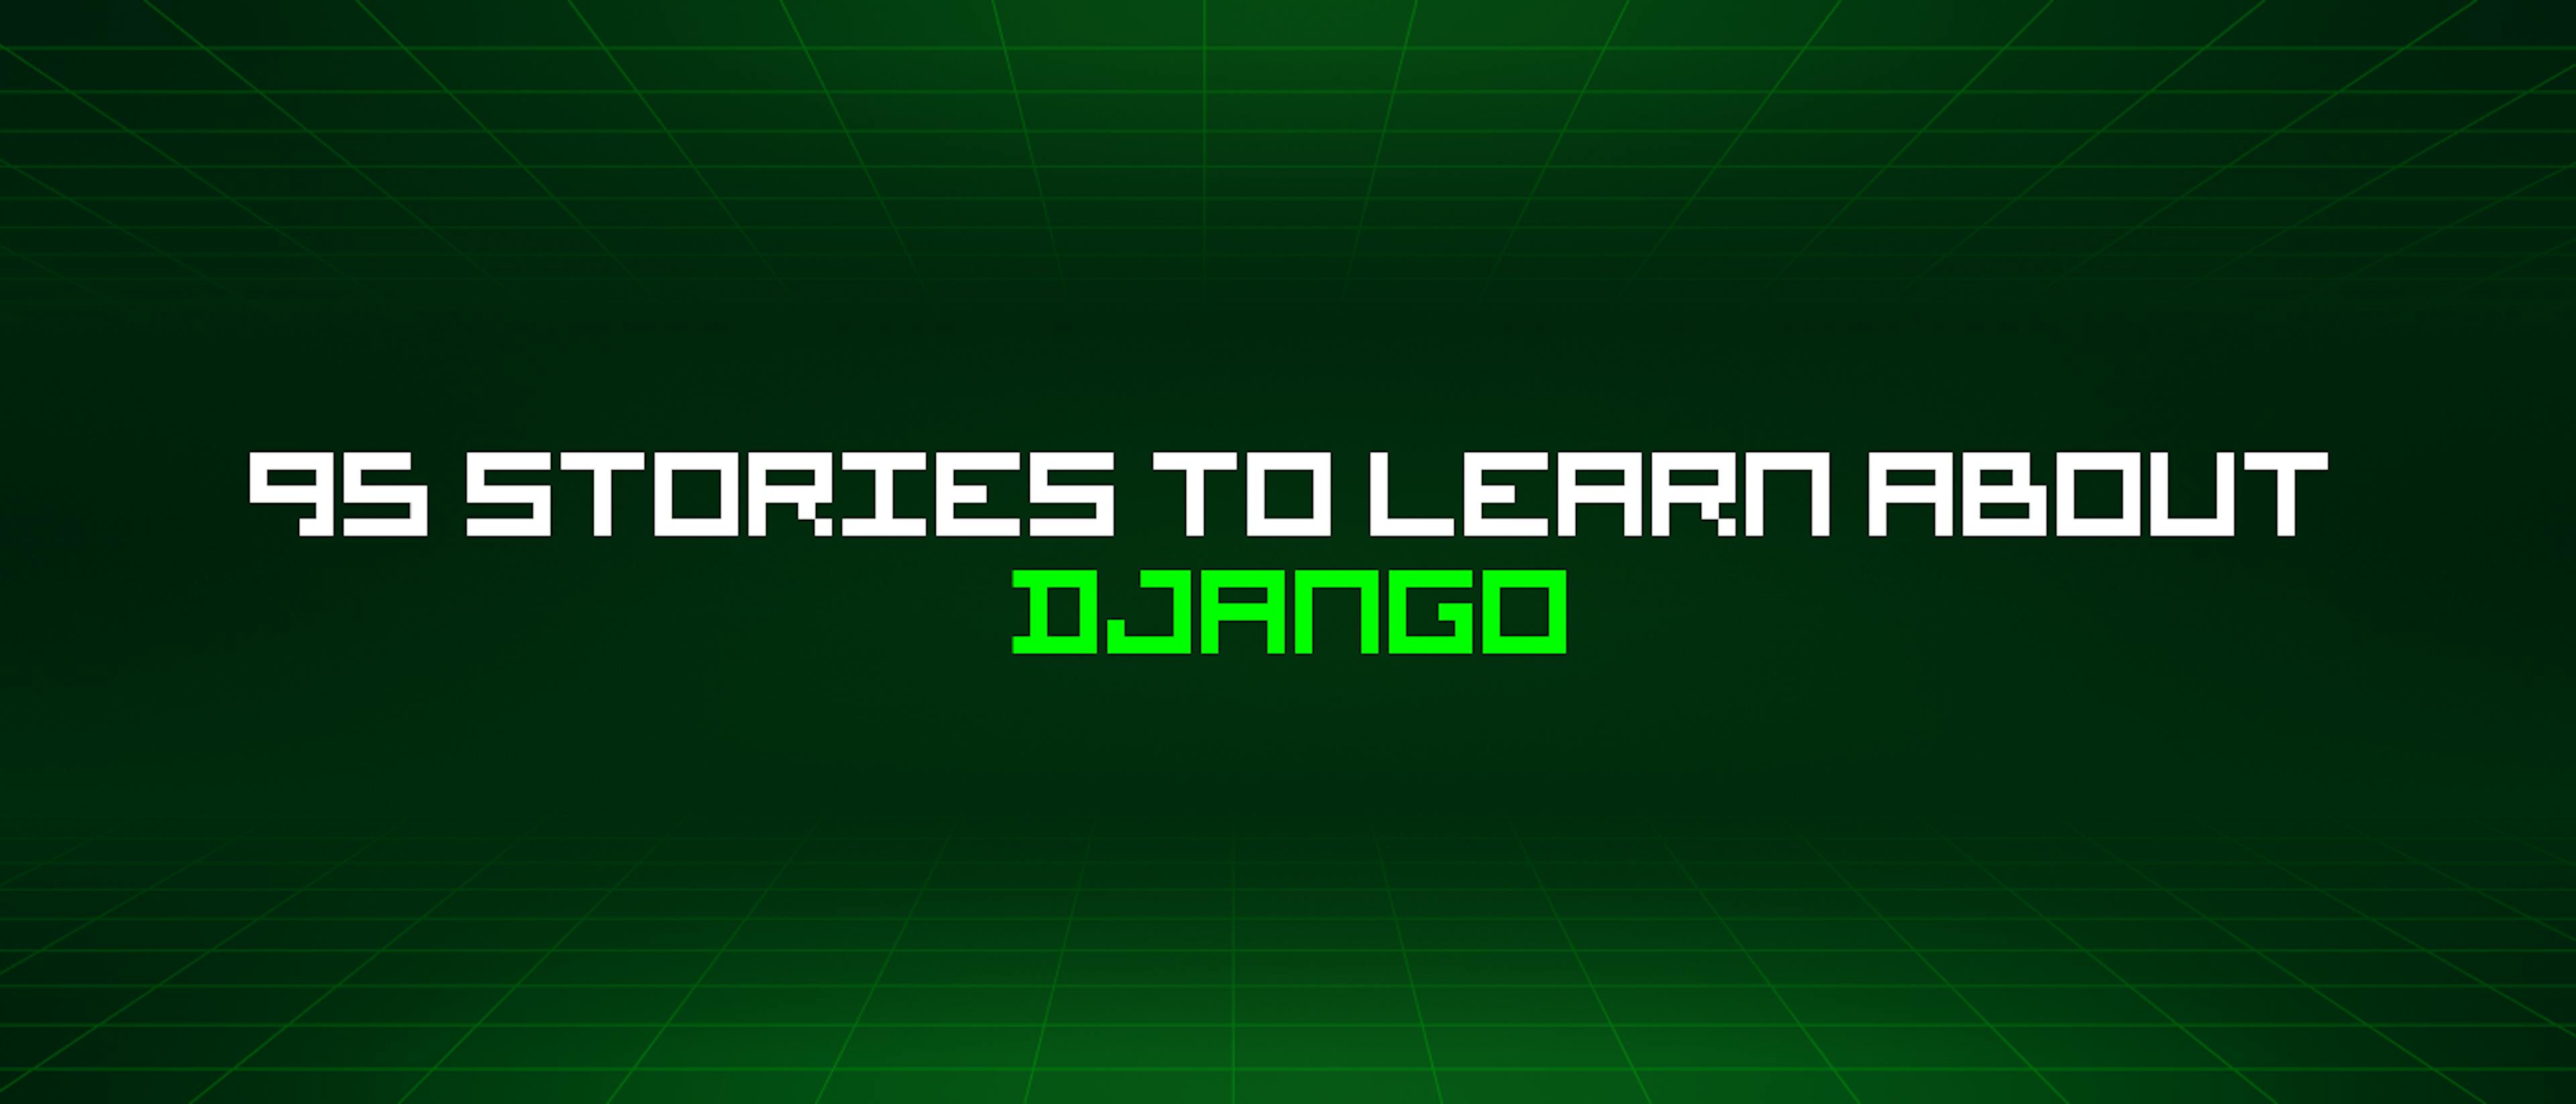 featured image - 95 Stories To Learn About Django